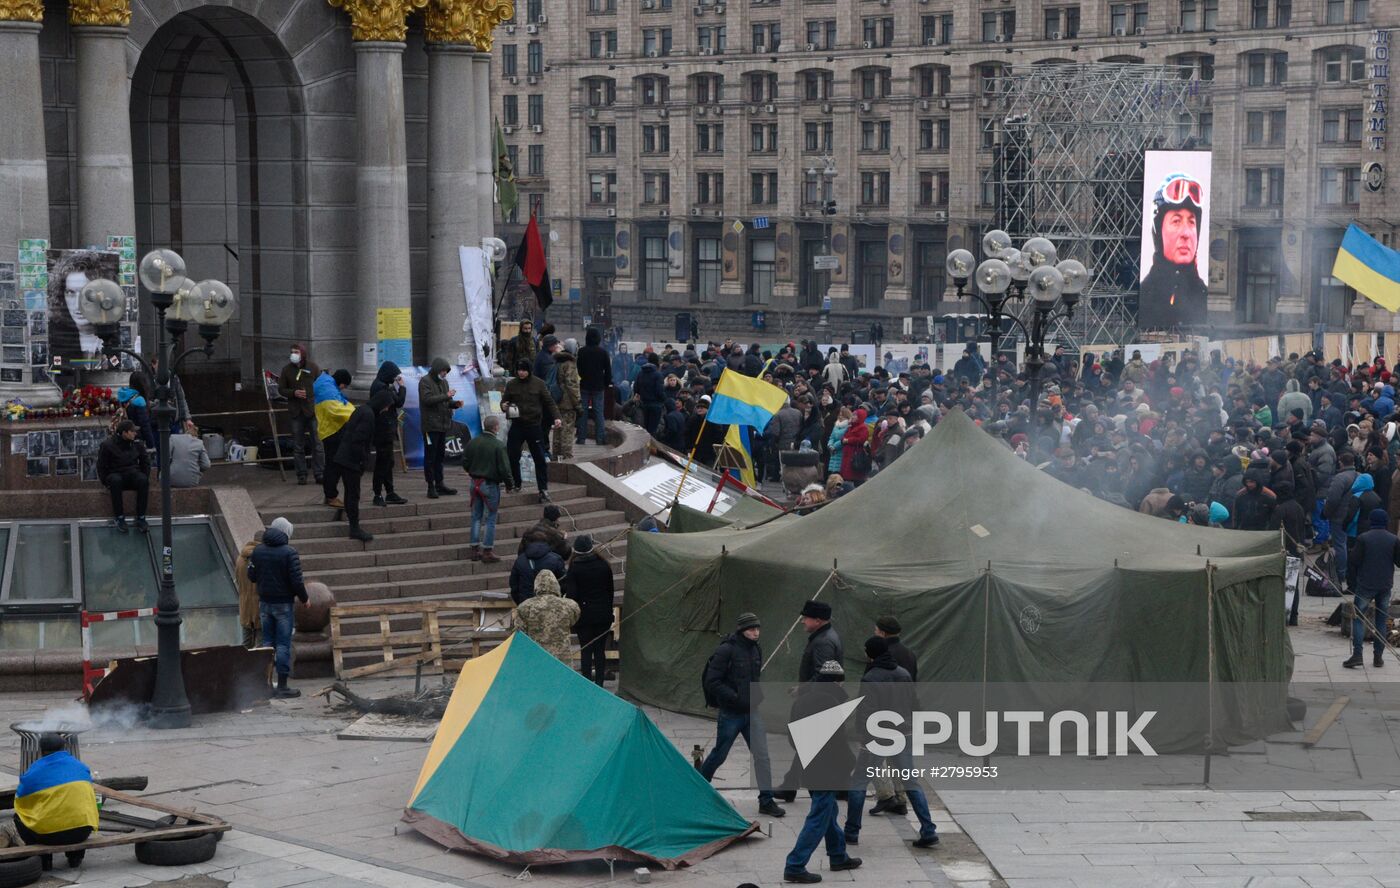 People's Veche (Assembly) of radicals on Indepence Square in Kiev